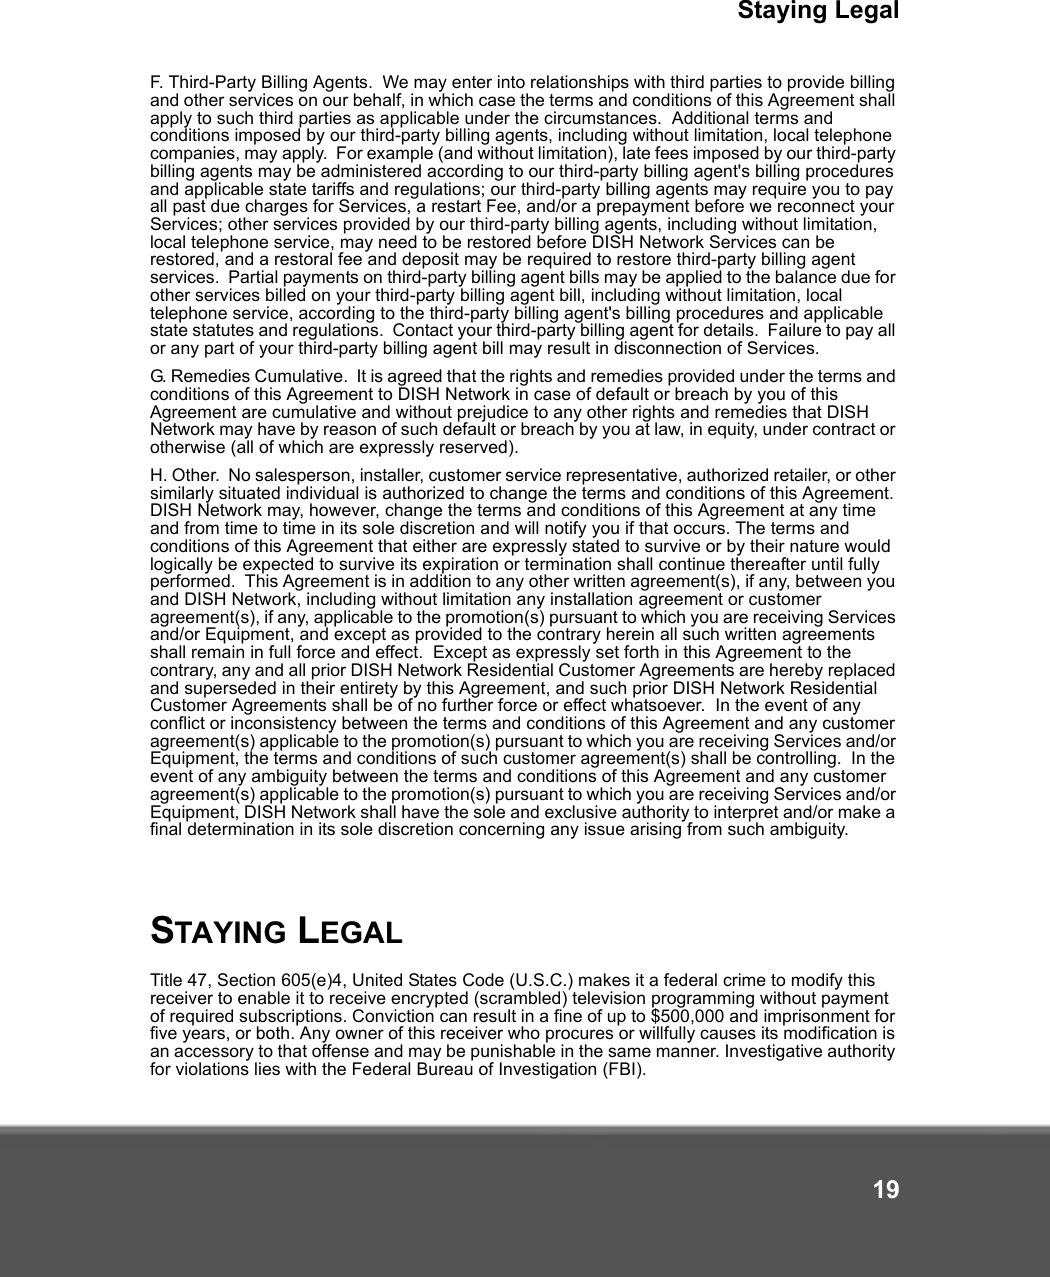 Staying Legal19F. Third-Party Billing Agents.  We may enter into relationships with third parties to provide billing and other services on our behalf, in which case the terms and conditions of this Agreement shall apply to such third parties as applicable under the circumstances.  Additional terms and conditions imposed by our third-party billing agents, including without limitation, local telephone companies, may apply.  For example (and without limitation), late fees imposed by our third-party billing agents may be administered according to our third-party billing agent&apos;s billing procedures and applicable state tariffs and regulations; our third-party billing agents may require you to pay all past due charges for Services, a restart Fee, and/or a prepayment before we reconnect your Services; other services provided by our third-party billing agents, including without limitation, local telephone service, may need to be restored before DISH Network Services can be restored, and a restoral fee and deposit may be required to restore third-party billing agent services.  Partial payments on third-party billing agent bills may be applied to the balance due for other services billed on your third-party billing agent bill, including without limitation, local telephone service, according to the third-party billing agent&apos;s billing procedures and applicable state statutes and regulations.  Contact your third-party billing agent for details.  Failure to pay all or any part of your third-party billing agent bill may result in disconnection of Services.  G. Remedies Cumulative.  It is agreed that the rights and remedies provided under the terms and conditions of this Agreement to DISH Network in case of default or breach by you of this Agreement are cumulative and without prejudice to any other rights and remedies that DISH Network may have by reason of such default or breach by you at law, in equity, under contract or otherwise (all of which are expressly reserved).H. Other.  No salesperson, installer, customer service representative, authorized retailer, or other similarly situated individual is authorized to change the terms and conditions of this Agreement. DISH Network may, however, change the terms and conditions of this Agreement at any time and from time to time in its sole discretion and will notify you if that occurs. The terms and conditions of this Agreement that either are expressly stated to survive or by their nature would logically be expected to survive its expiration or termination shall continue thereafter until fully performed.  This Agreement is in addition to any other written agreement(s), if any, between you and DISH Network, including without limitation any installation agreement or customer agreement(s), if any, applicable to the promotion(s) pursuant to which you are receiving Services and/or Equipment, and except as provided to the contrary herein all such written agreements shall remain in full force and effect.  Except as expressly set forth in this Agreement to the contrary, any and all prior DISH Network Residential Customer Agreements are hereby replaced and superseded in their entirety by this Agreement, and such prior DISH Network Residential Customer Agreements shall be of no further force or effect whatsoever.  In the event of any conflict or inconsistency between the terms and conditions of this Agreement and any customer agreement(s) applicable to the promotion(s) pursuant to which you are receiving Services and/or Equipment, the terms and conditions of such customer agreement(s) shall be controlling.  In the event of any ambiguity between the terms and conditions of this Agreement and any customer agreement(s) applicable to the promotion(s) pursuant to which you are receiving Services and/or Equipment, DISH Network shall have the sole and exclusive authority to interpret and/or make a final determination in its sole discretion concerning any issue arising from such ambiguity.STAYING LEGALTitle 47, Section 605(e)4, United States Code (U.S.C.) makes it a federal crime to modify this receiver to enable it to receive encrypted (scrambled) television programming without payment of required subscriptions. Conviction can result in a fine of up to $500,000 and imprisonment for five years, or both. Any owner of this receiver who procures or willfully causes its modification is an accessory to that offense and may be punishable in the same manner. Investigative authority for violations lies with the Federal Bureau of Investigation (FBI).